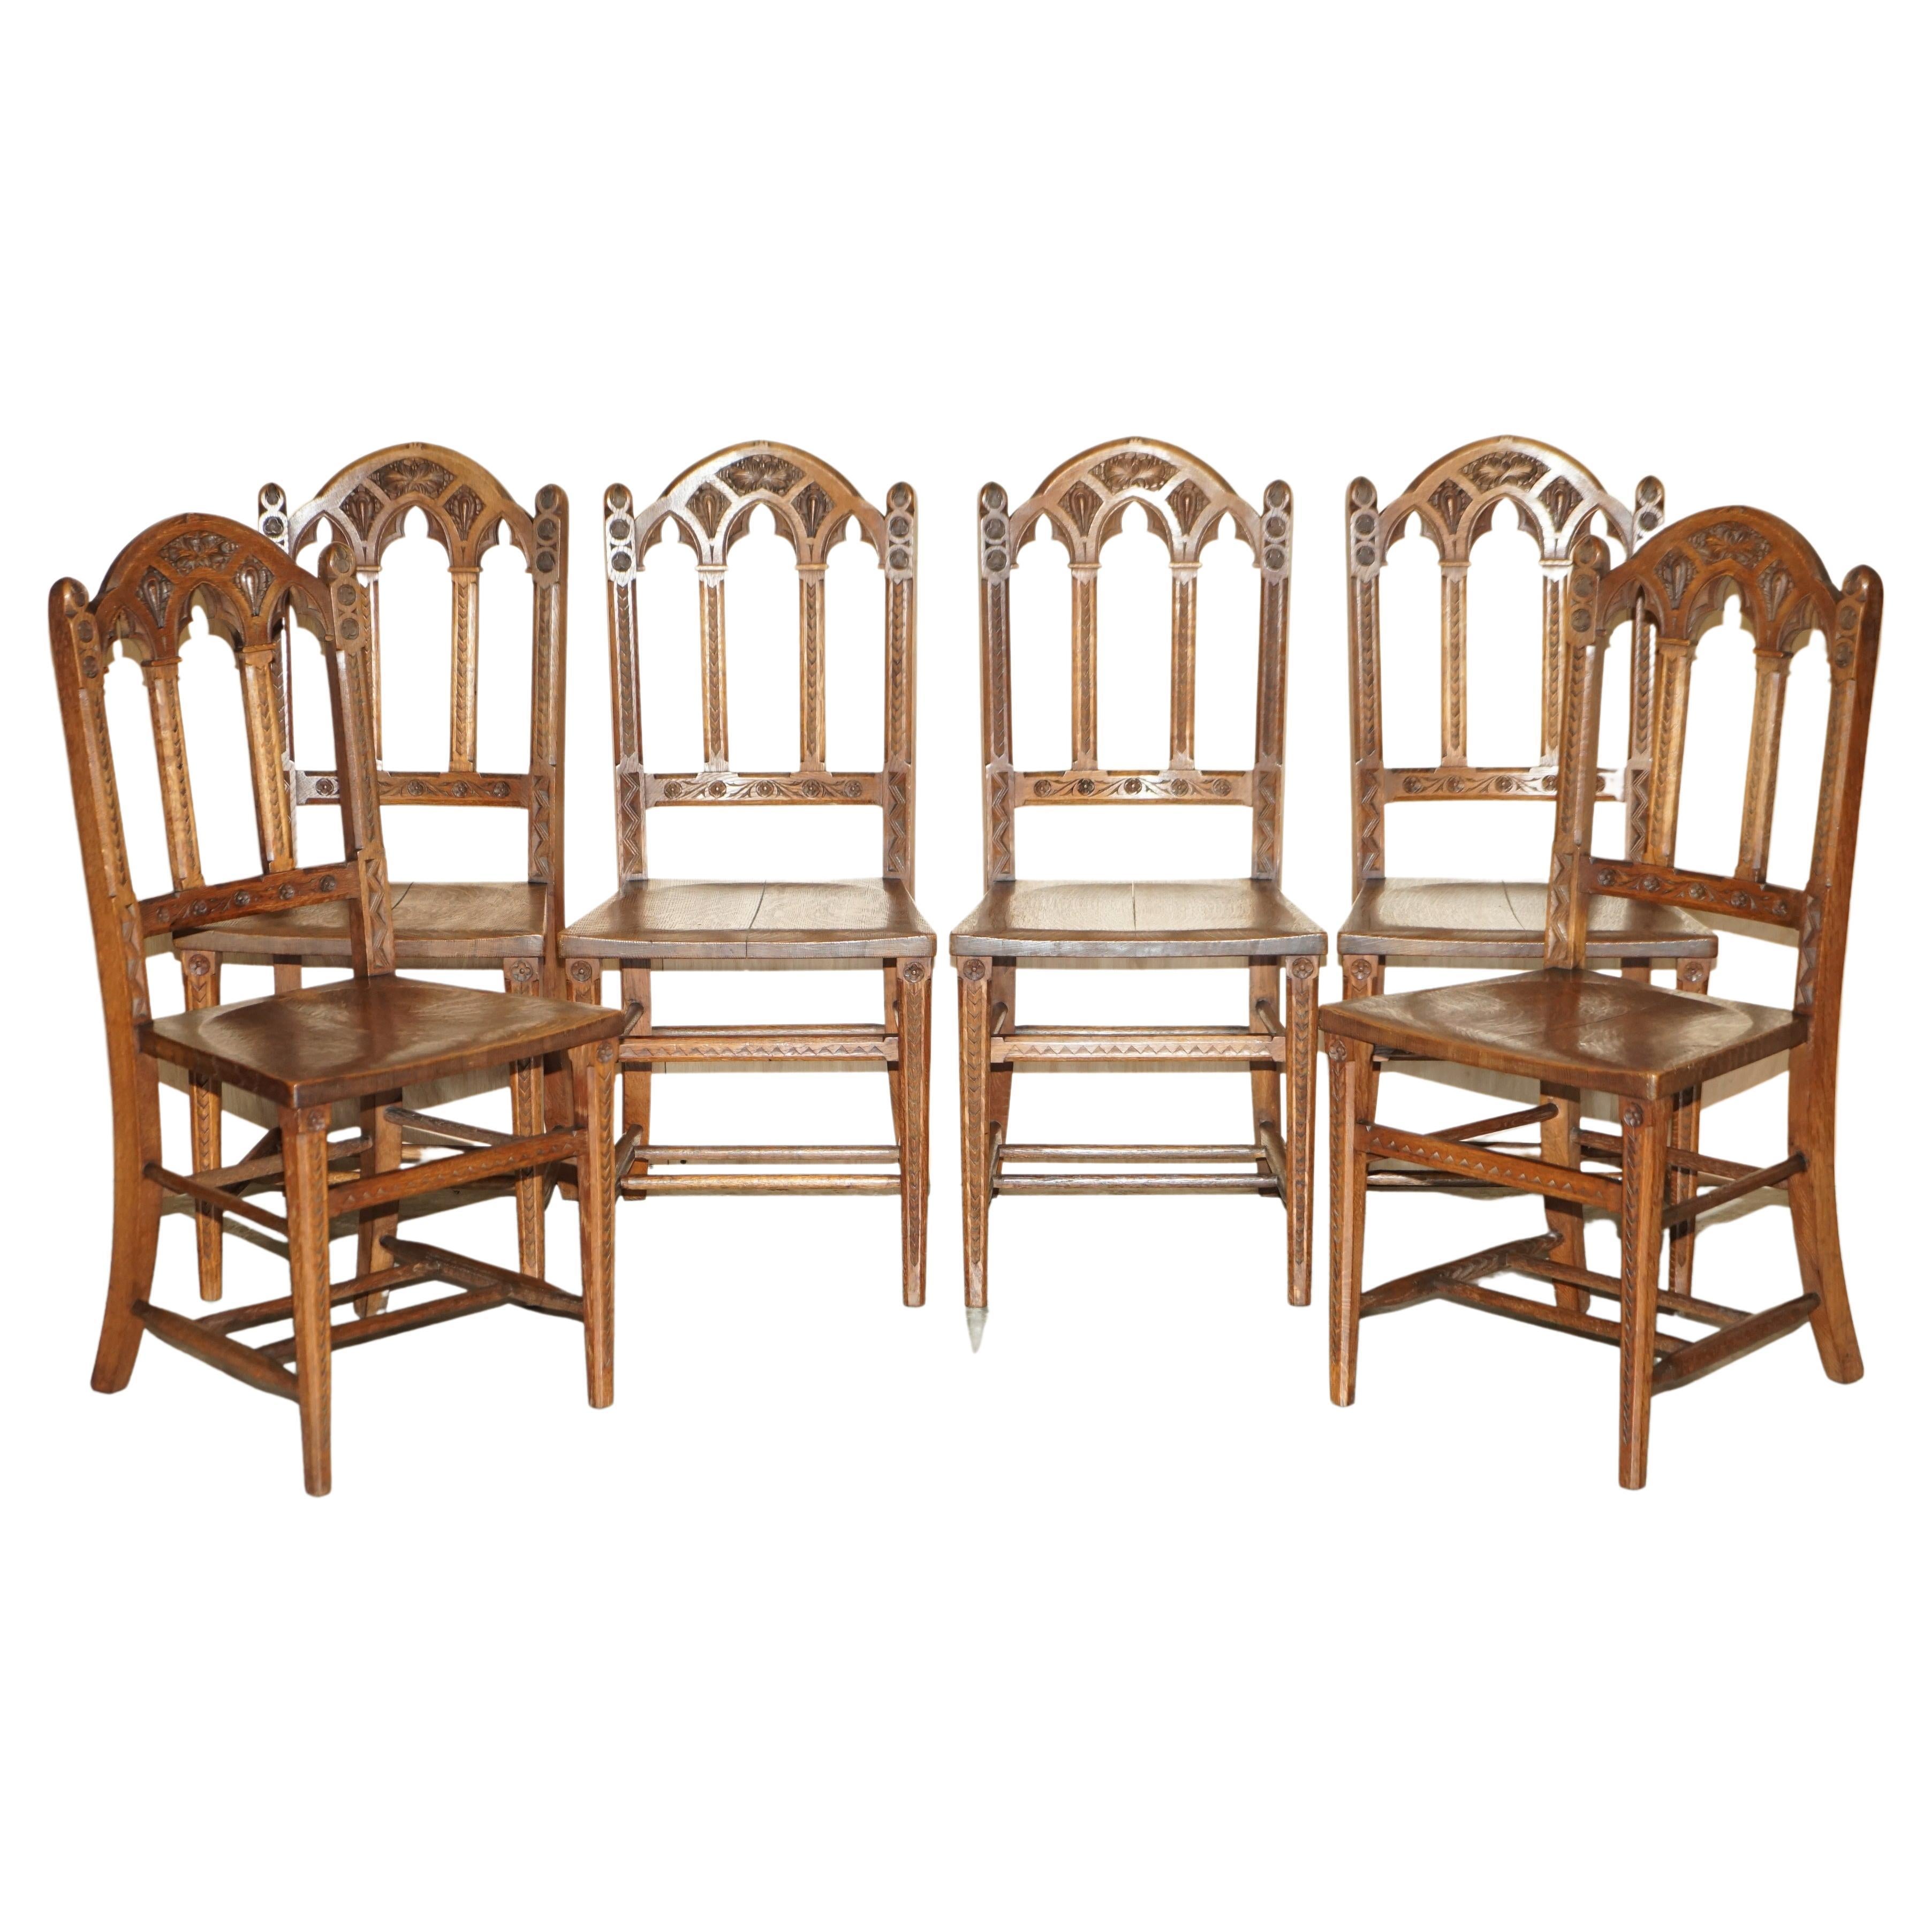 SIX ANTIQUE ORNATELY CARVED STEEPLE BACK WALNUT GOTHIC REVIVAL DiNING CHAIRS